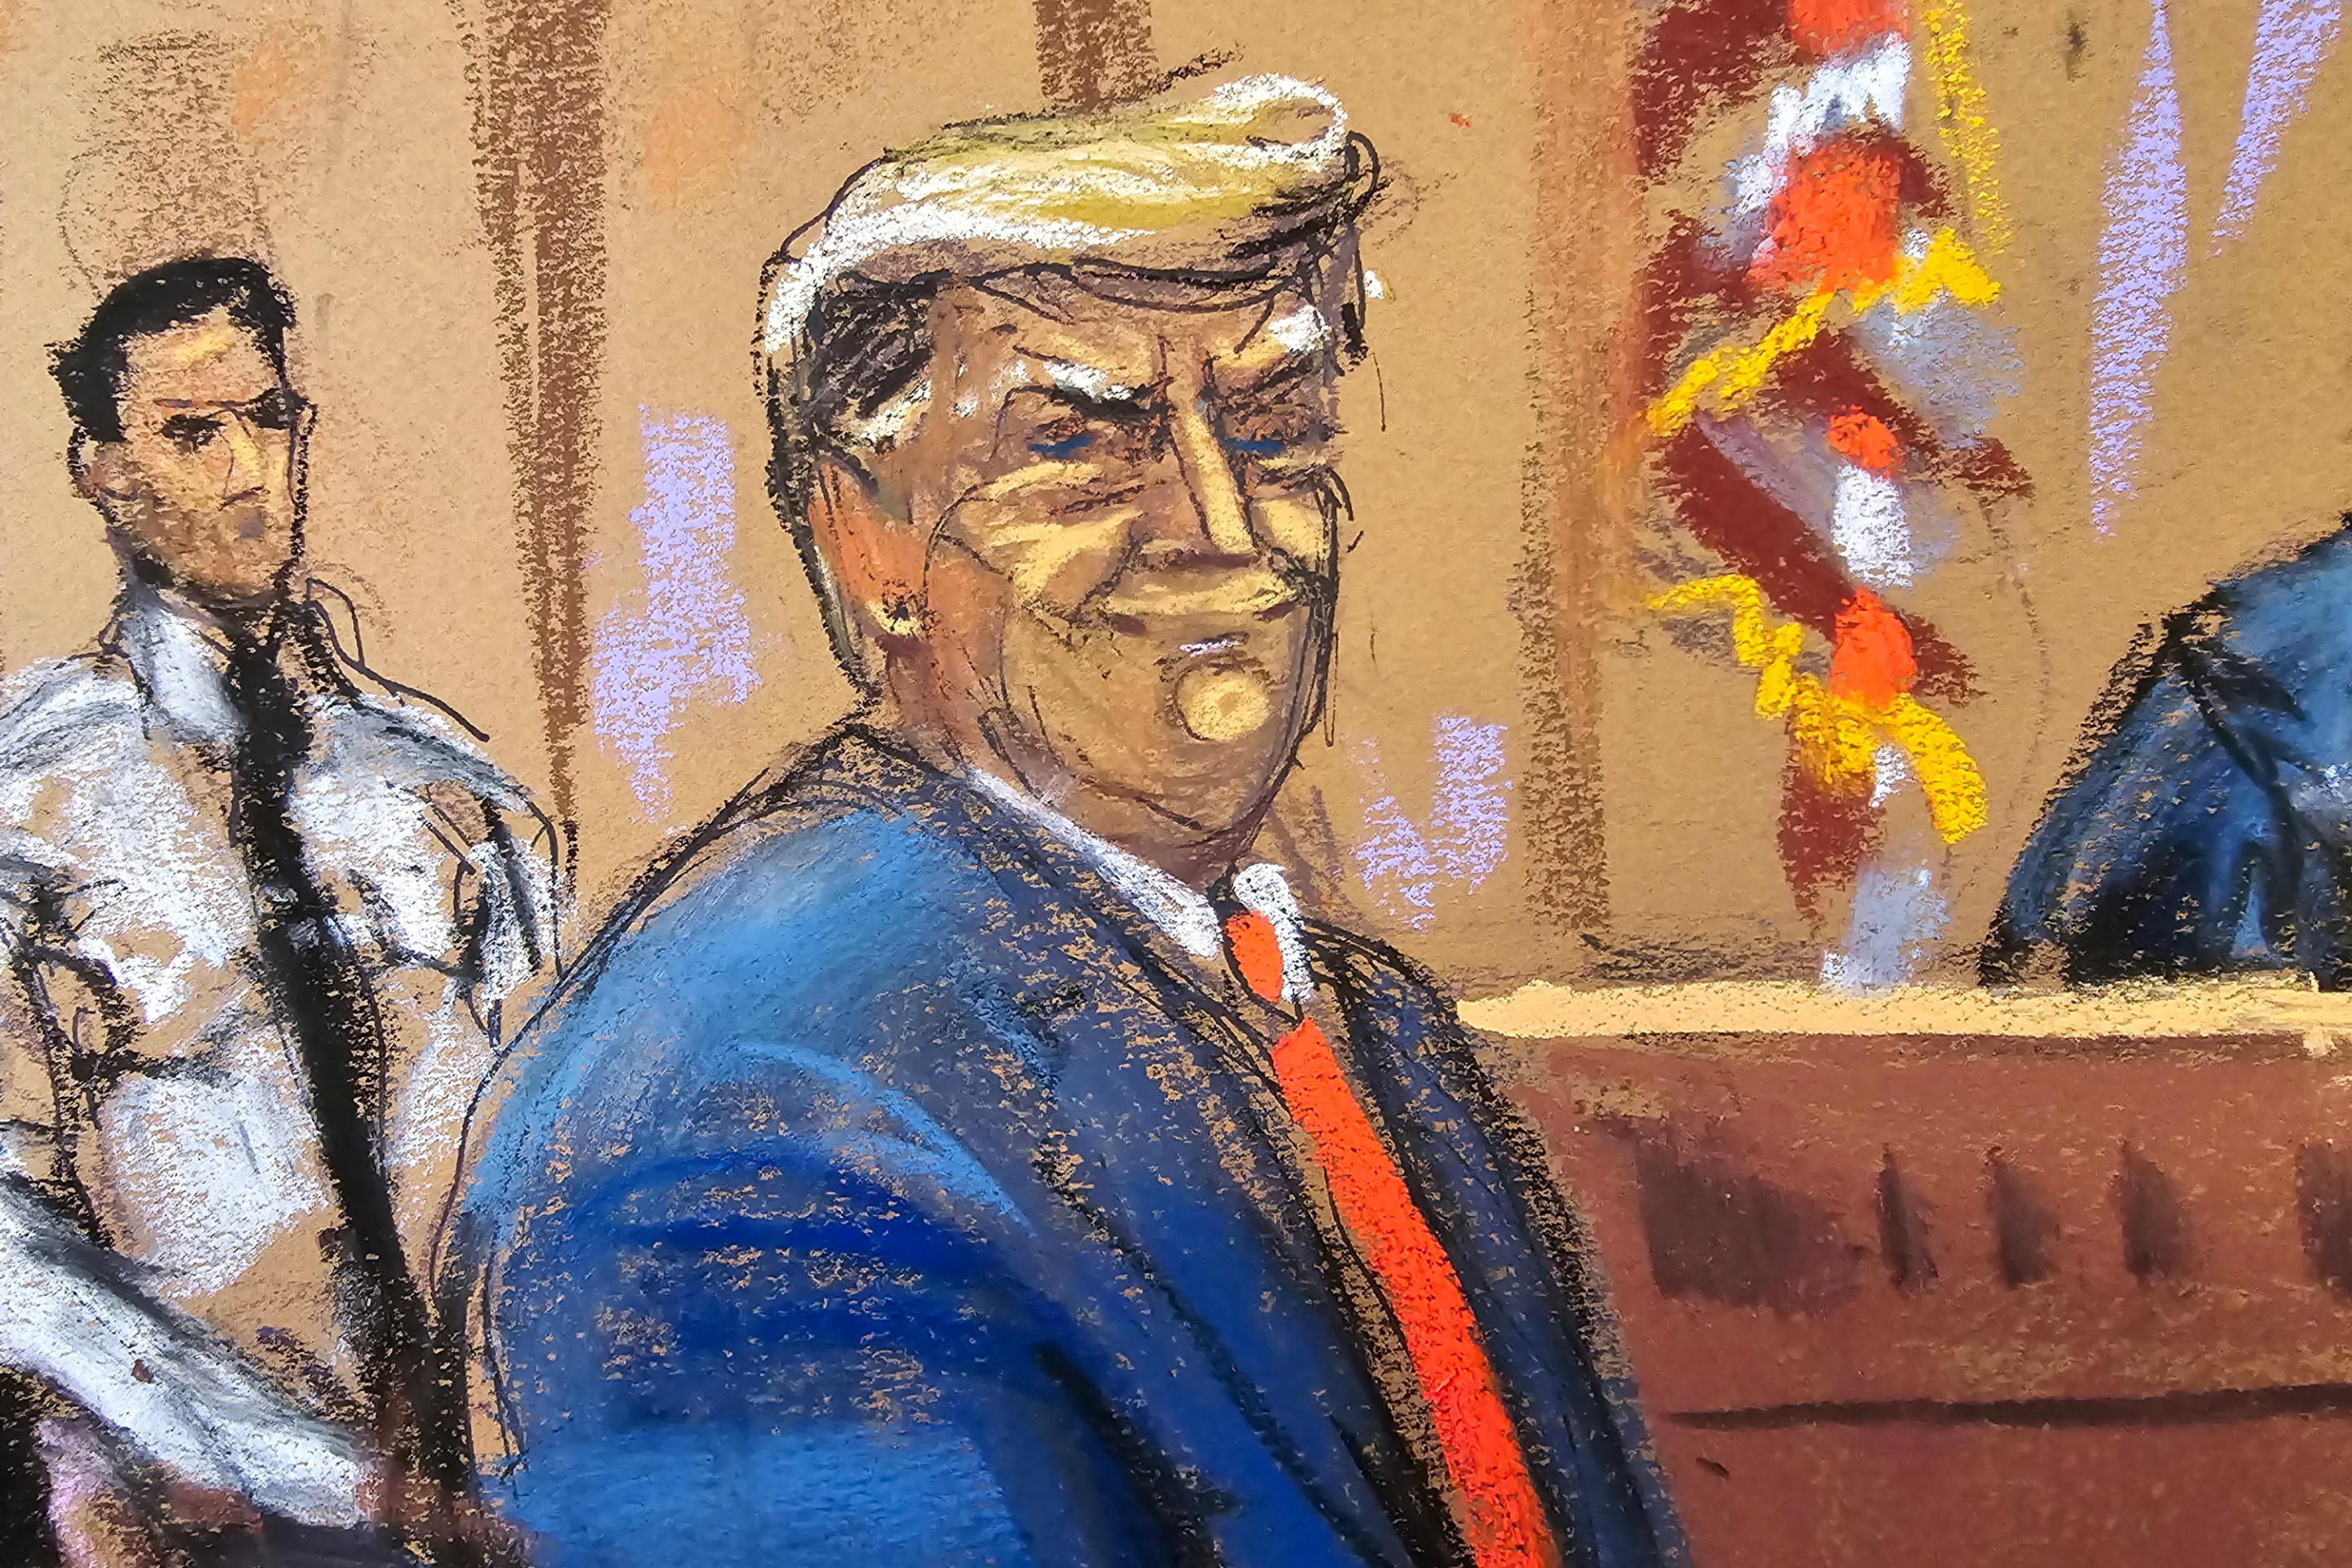 Former President Donald Trump smiles to the jury pool as he is introduced to them at the beginning of his hush money trial on April 15, in this courtroom sketch. (Jane Rosenberg/Reuters)